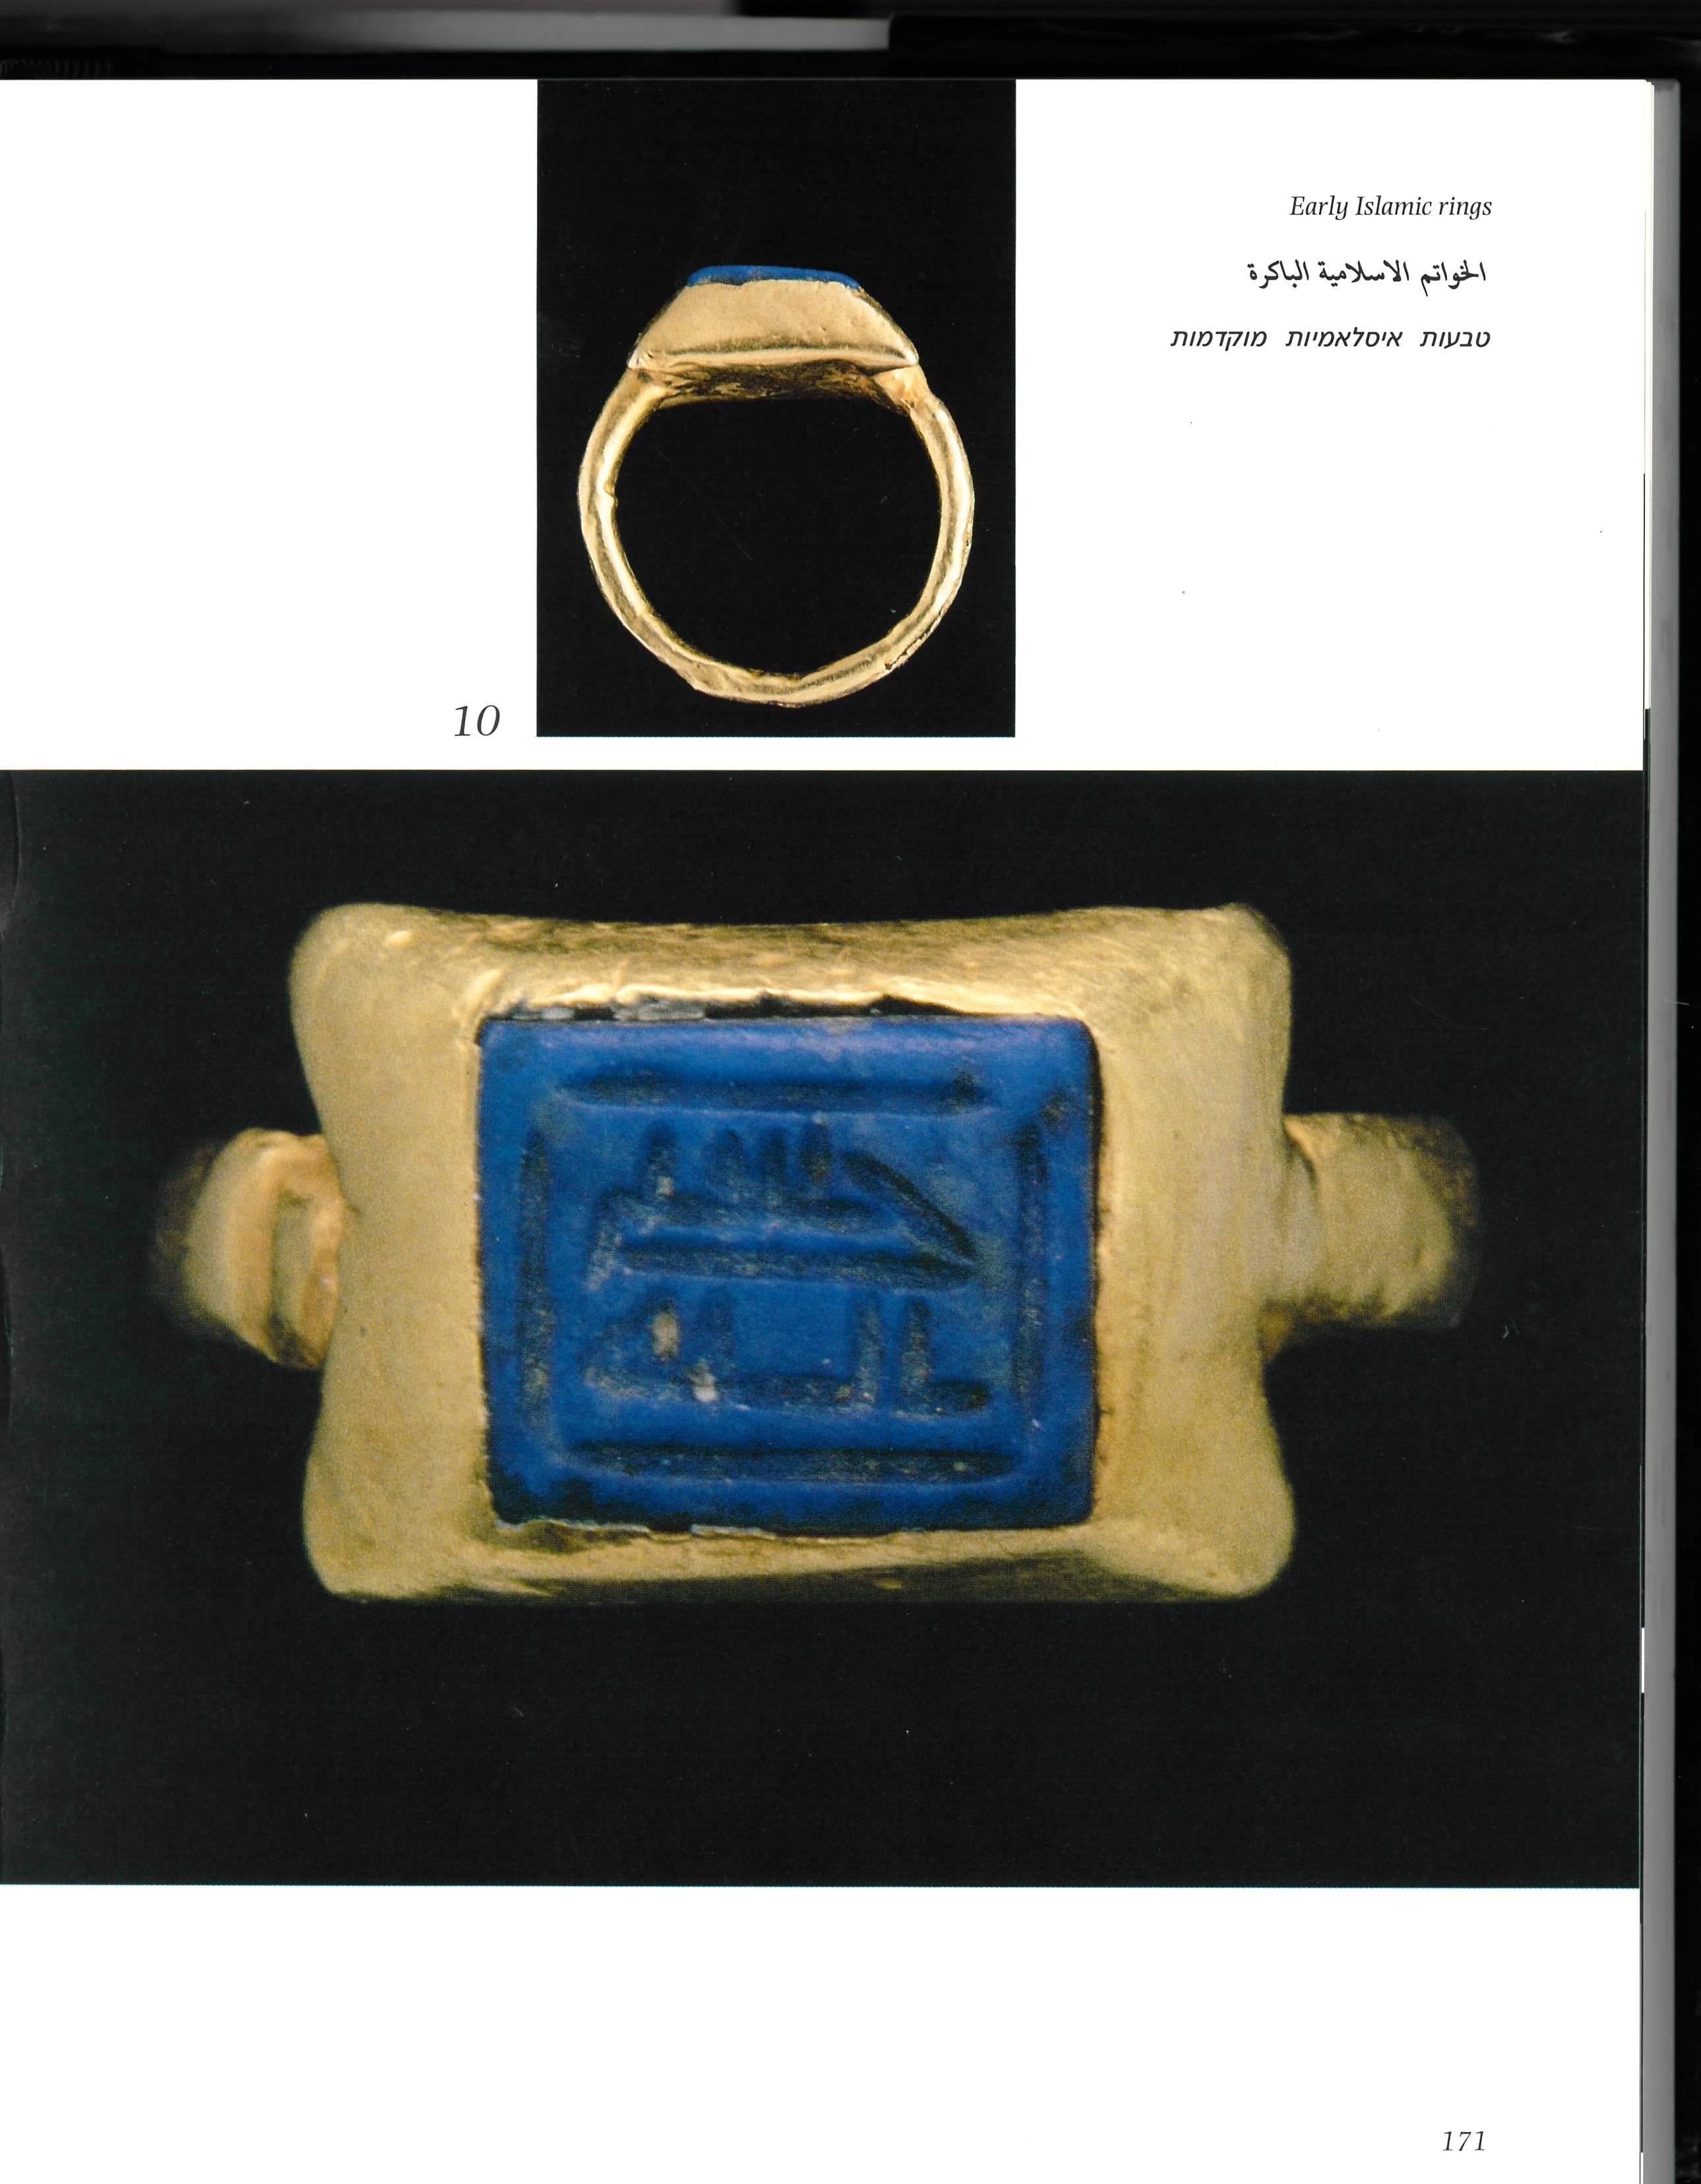 This book is a catalogue of Benjamin Zucker's collection of Islamic rings and inscribed gems, which offers a comprehensive chronological listing of 102 rings. Having 551 pages with 200 colour and 400 black & white illustrations showing two or three